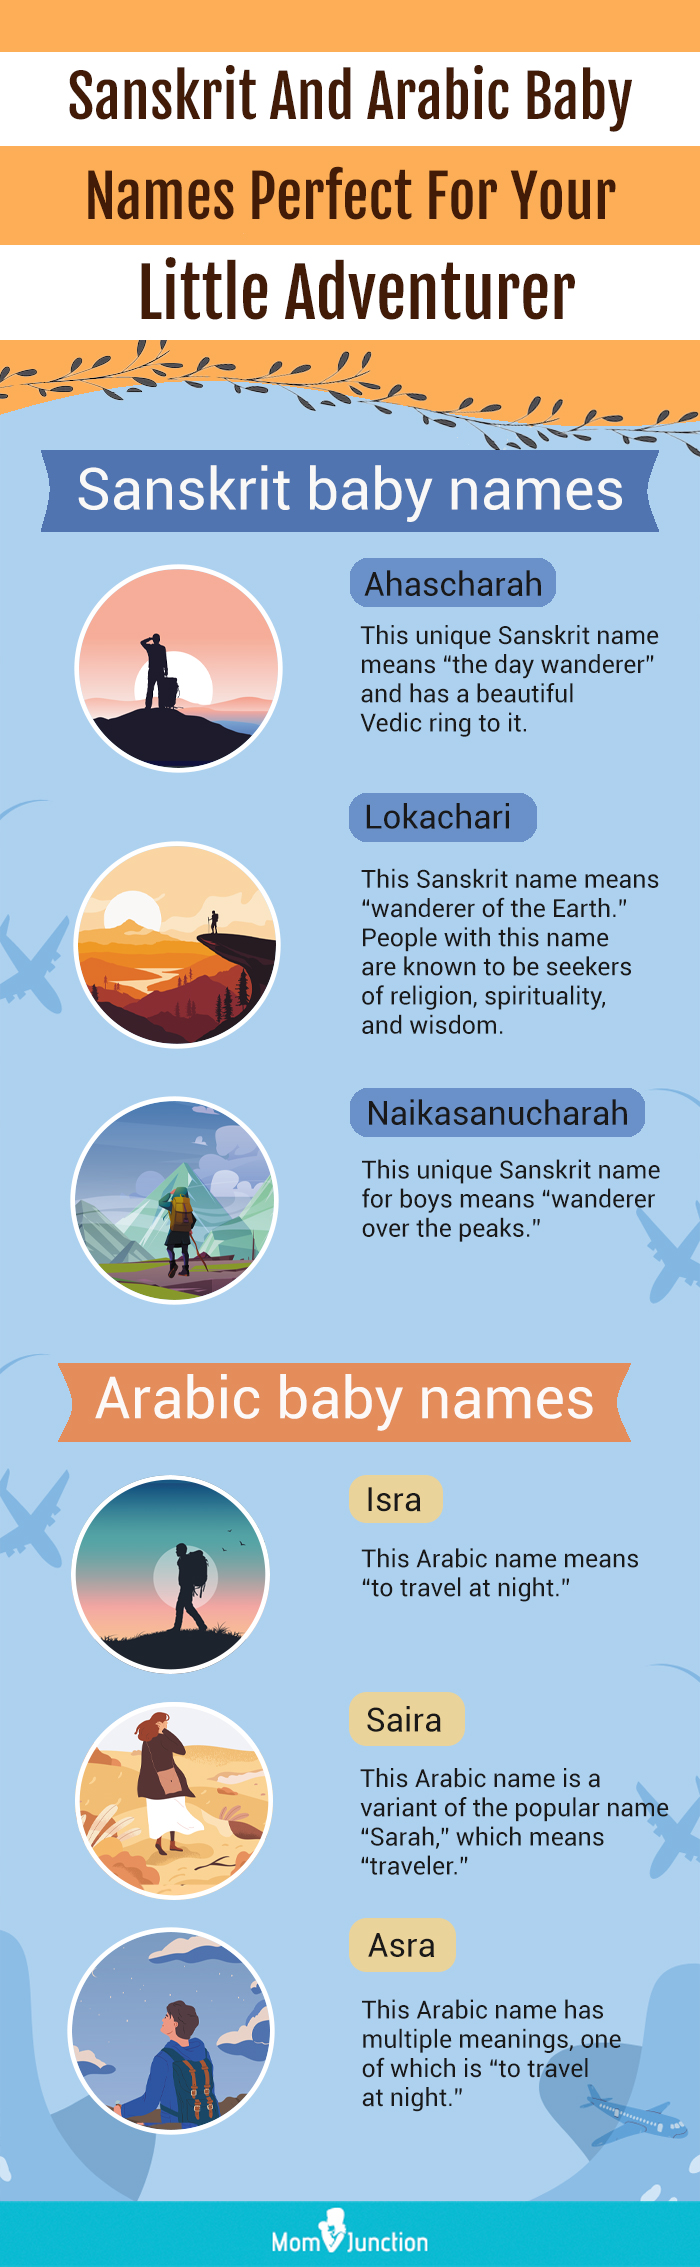 sanskrit and arabic baby names perfect for your little adventurer [infographic]